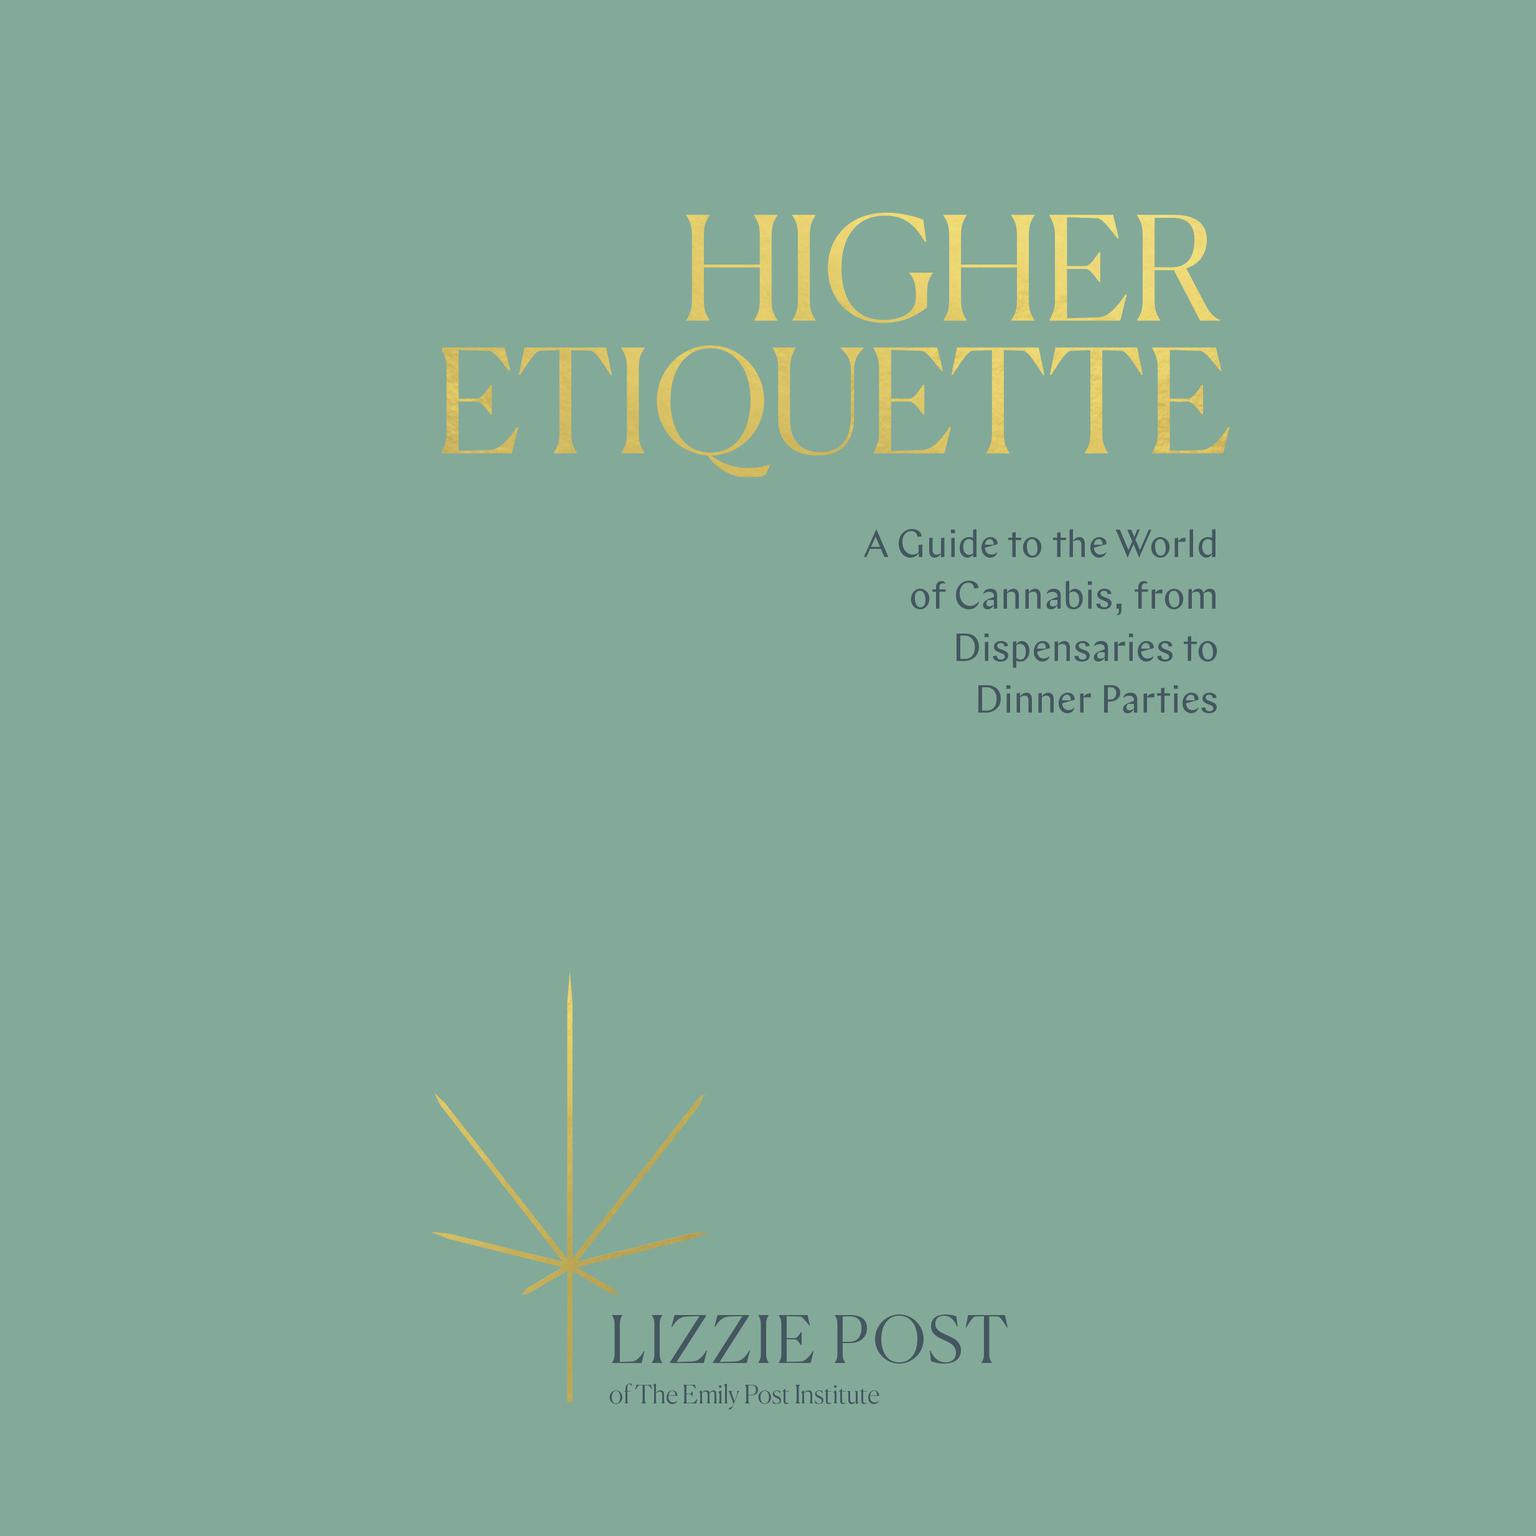 Higher Etiquette: A Guide to the World of Cannabis, from Dispensaries to Dinner Parties Audiobook, by Lizzie Post